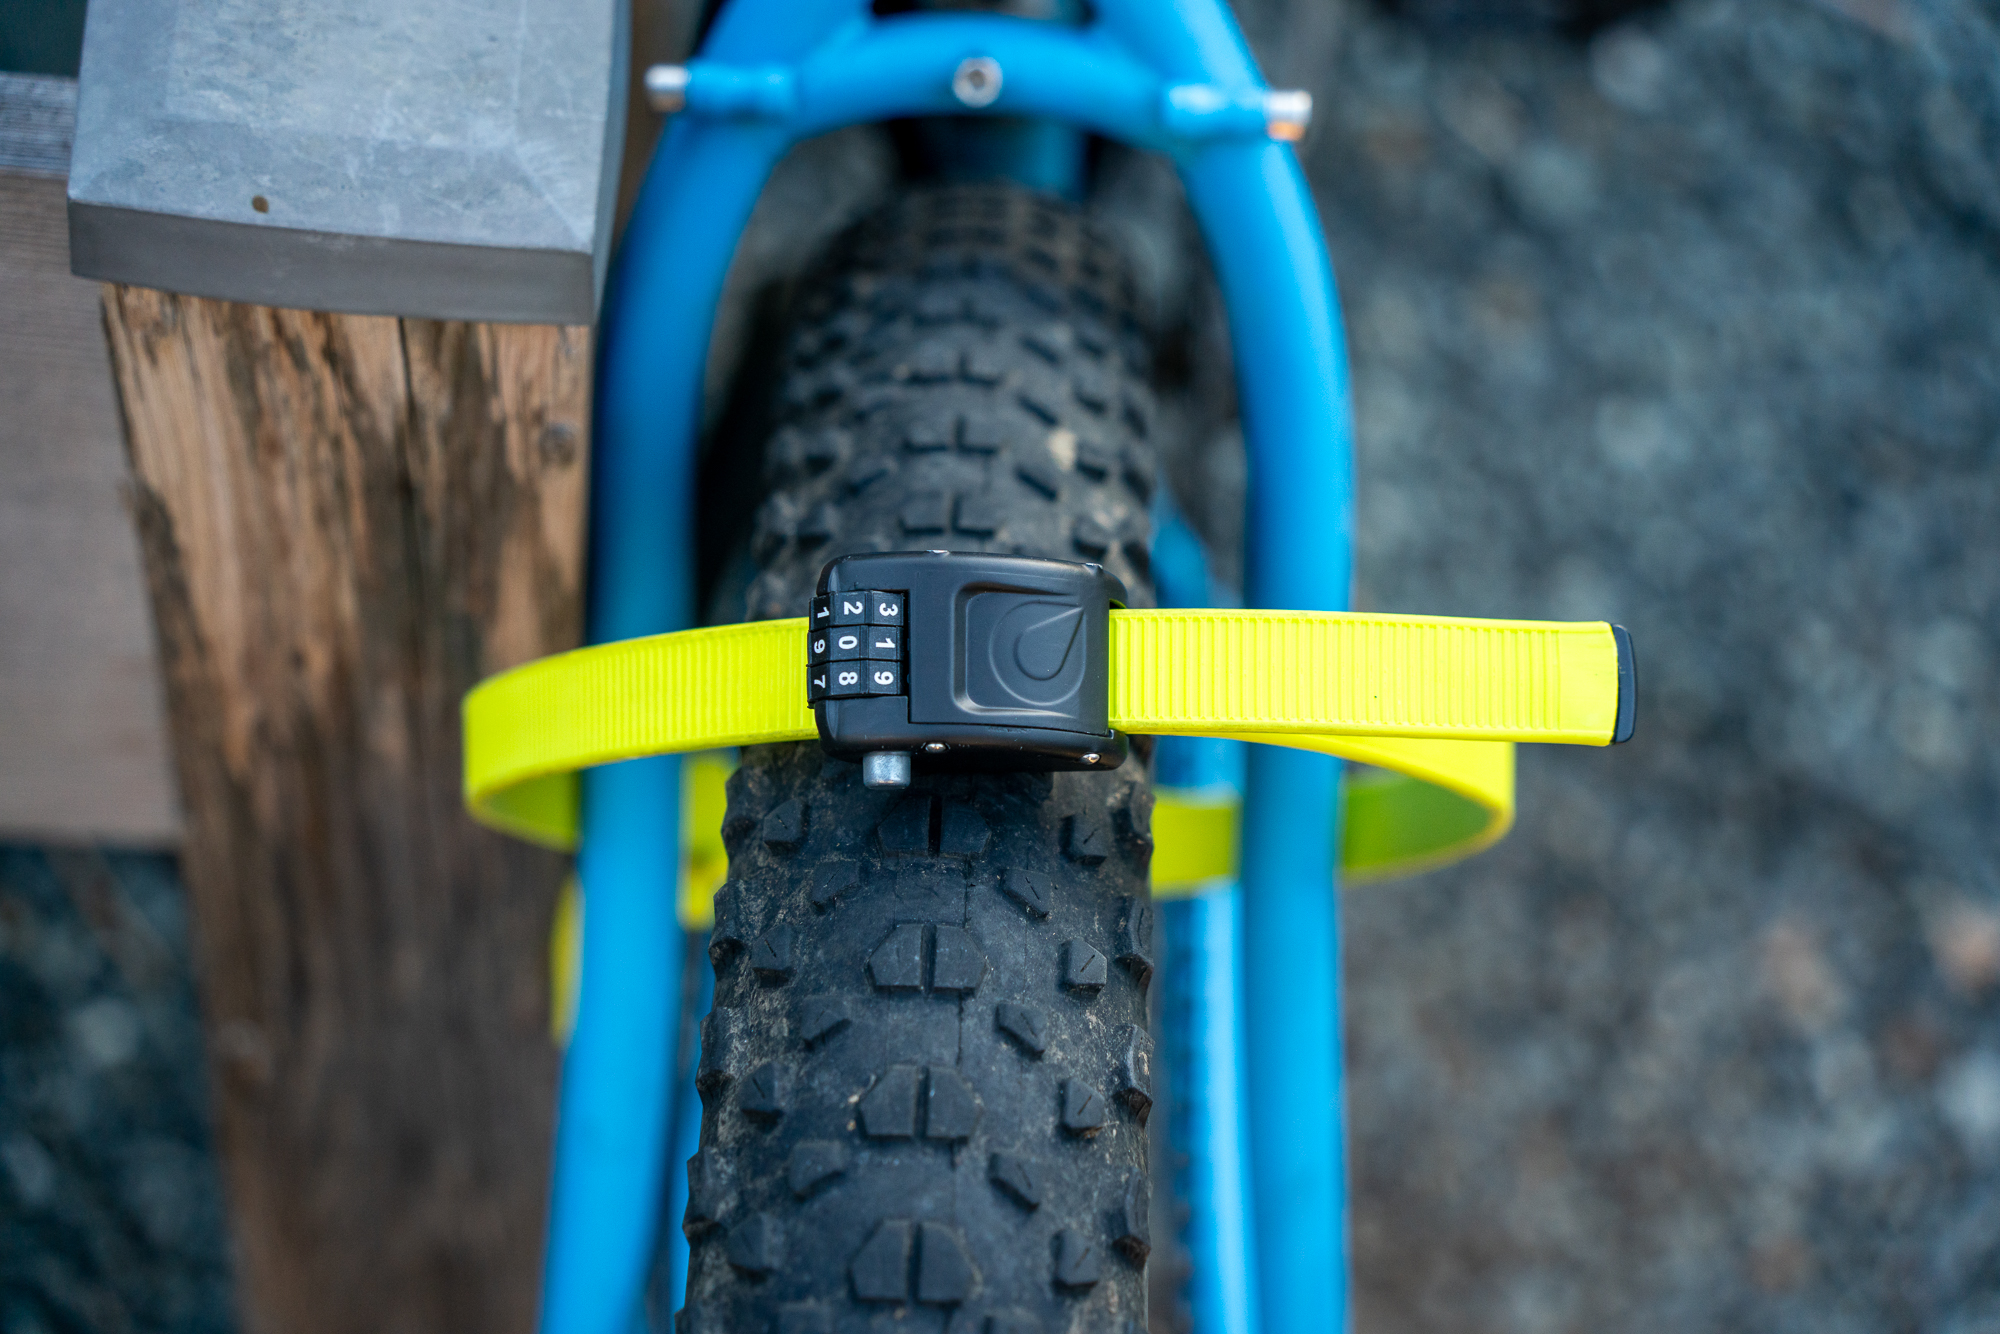 Best Lightweight Bike Lock  The Lightest & Smallest Bicycle Security